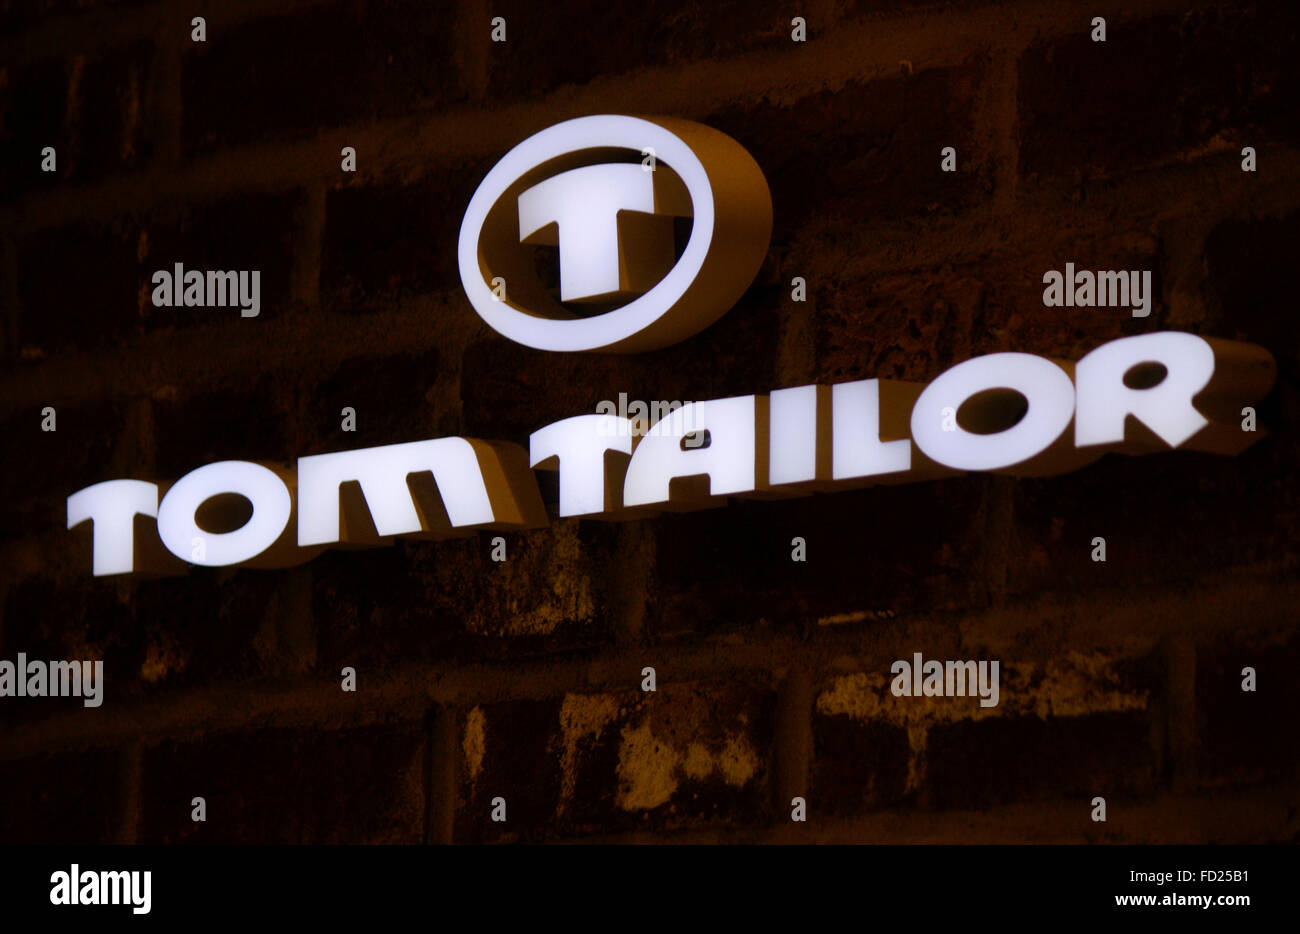 Alamy images hi-res - logo stock brand photography Tailor and